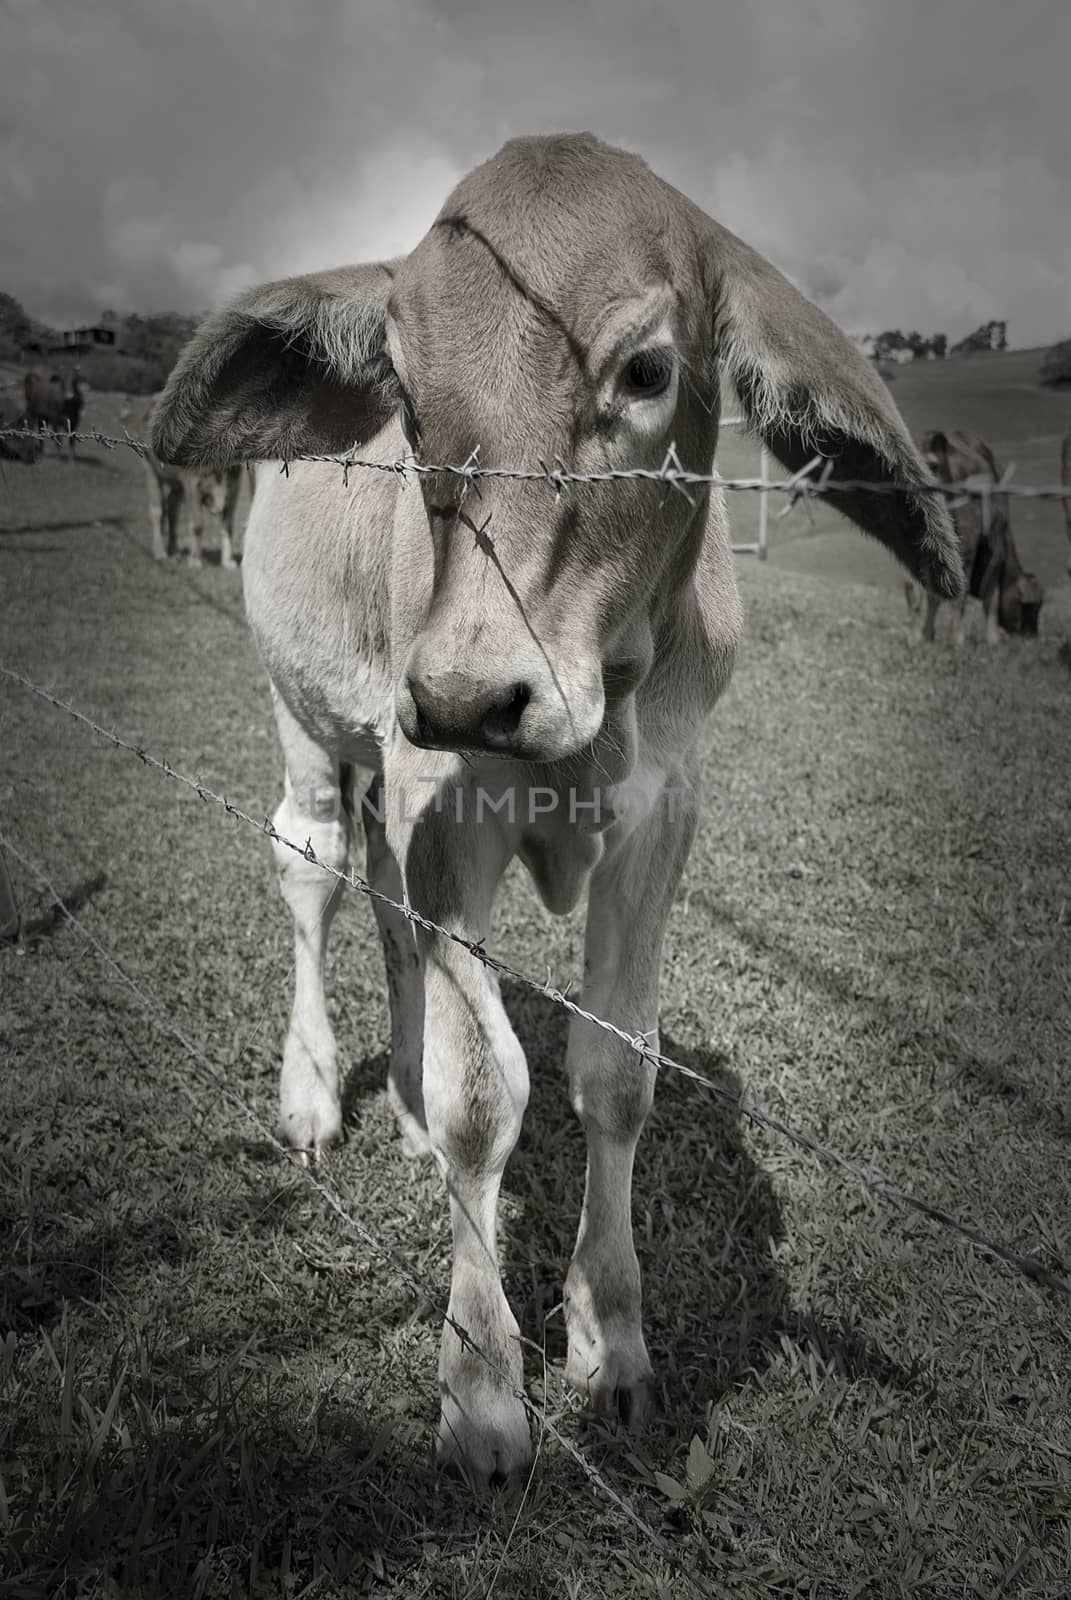 Small calf standing behind barbed wire in Queensland, Australia.